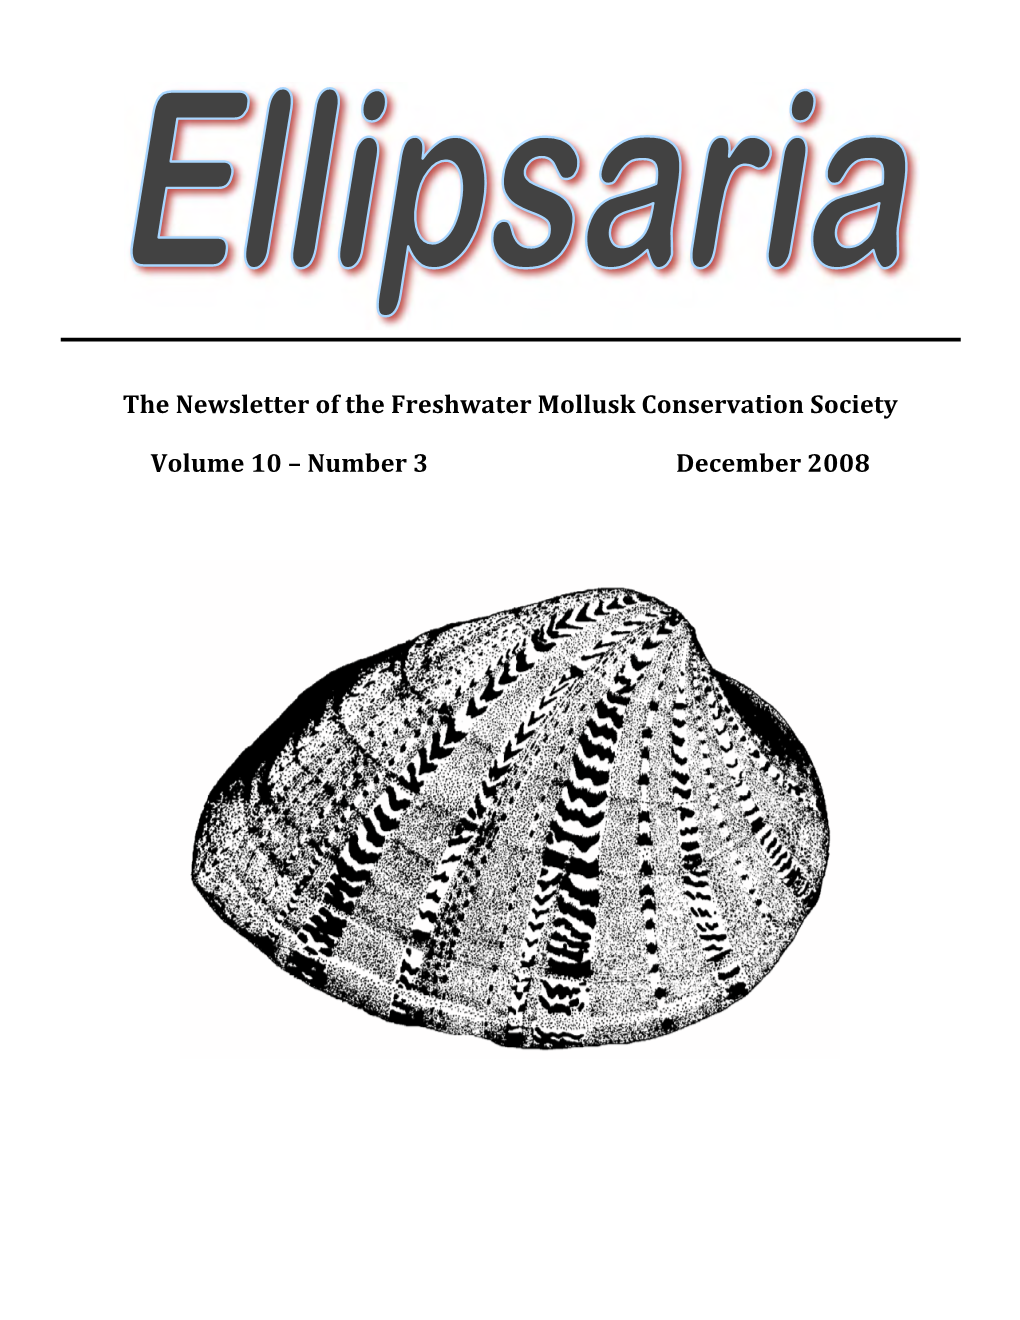 The Newsletter of the Freshwater Mollusk Conservation Society